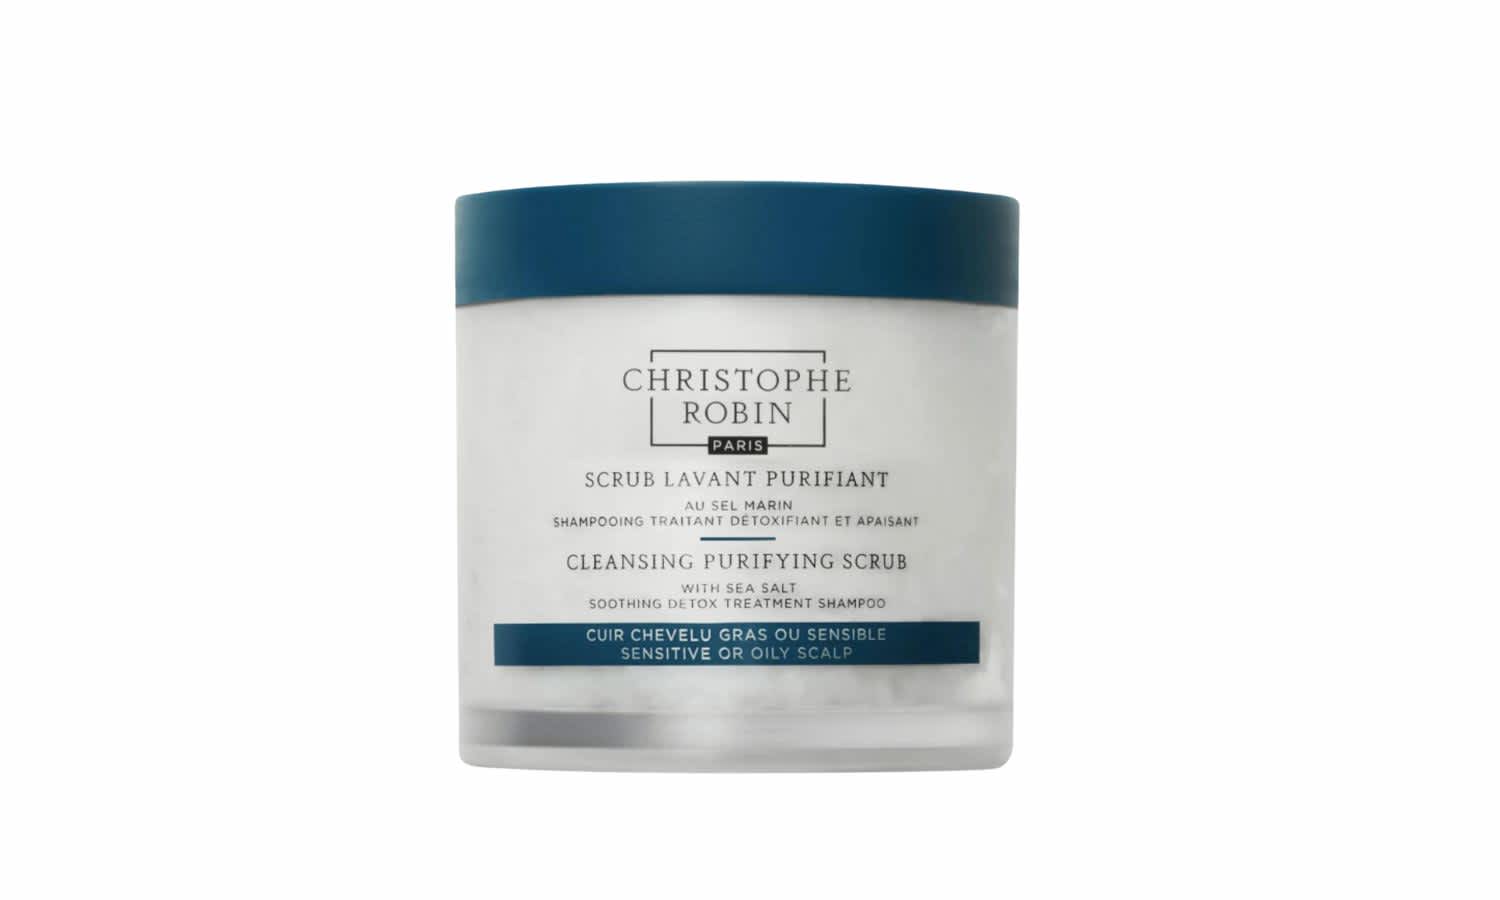 Christophe Robin, Cleansing and Purifying Scrub With Sea Salt men's grooming guide 